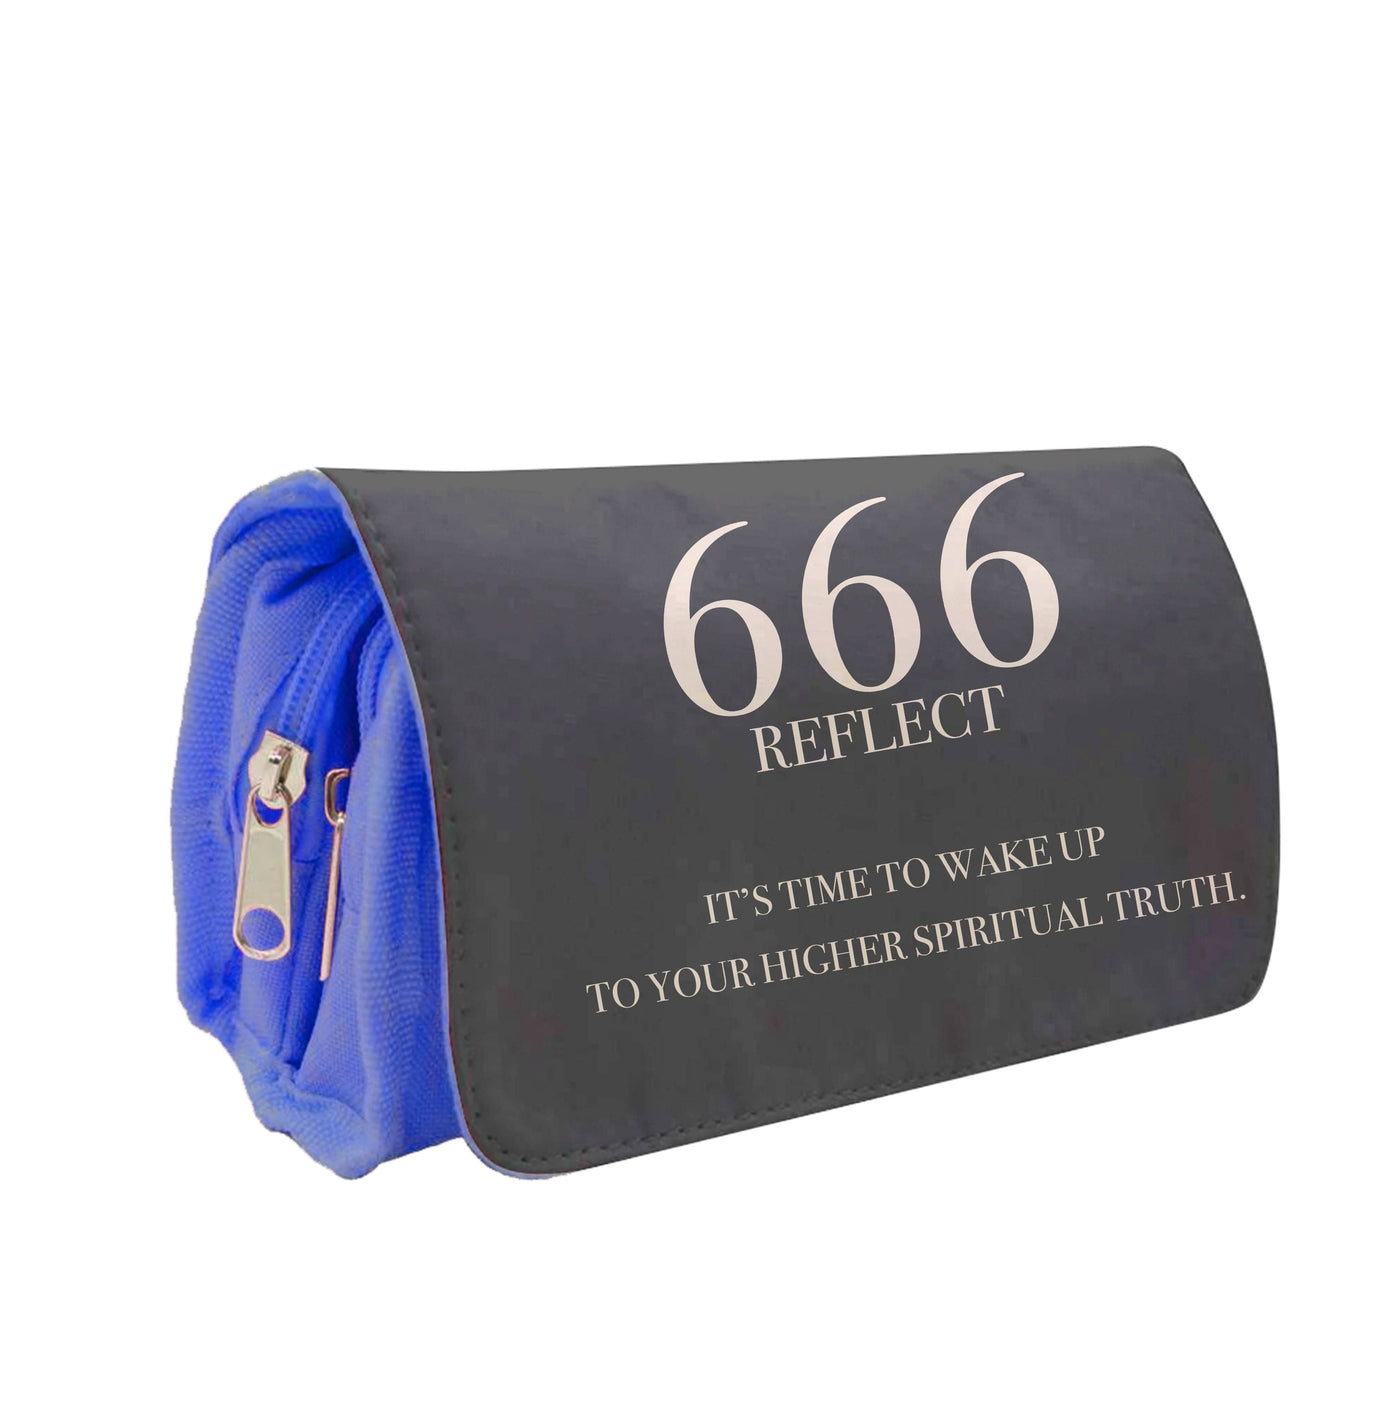 666 - Angel Numbers Pencil Case